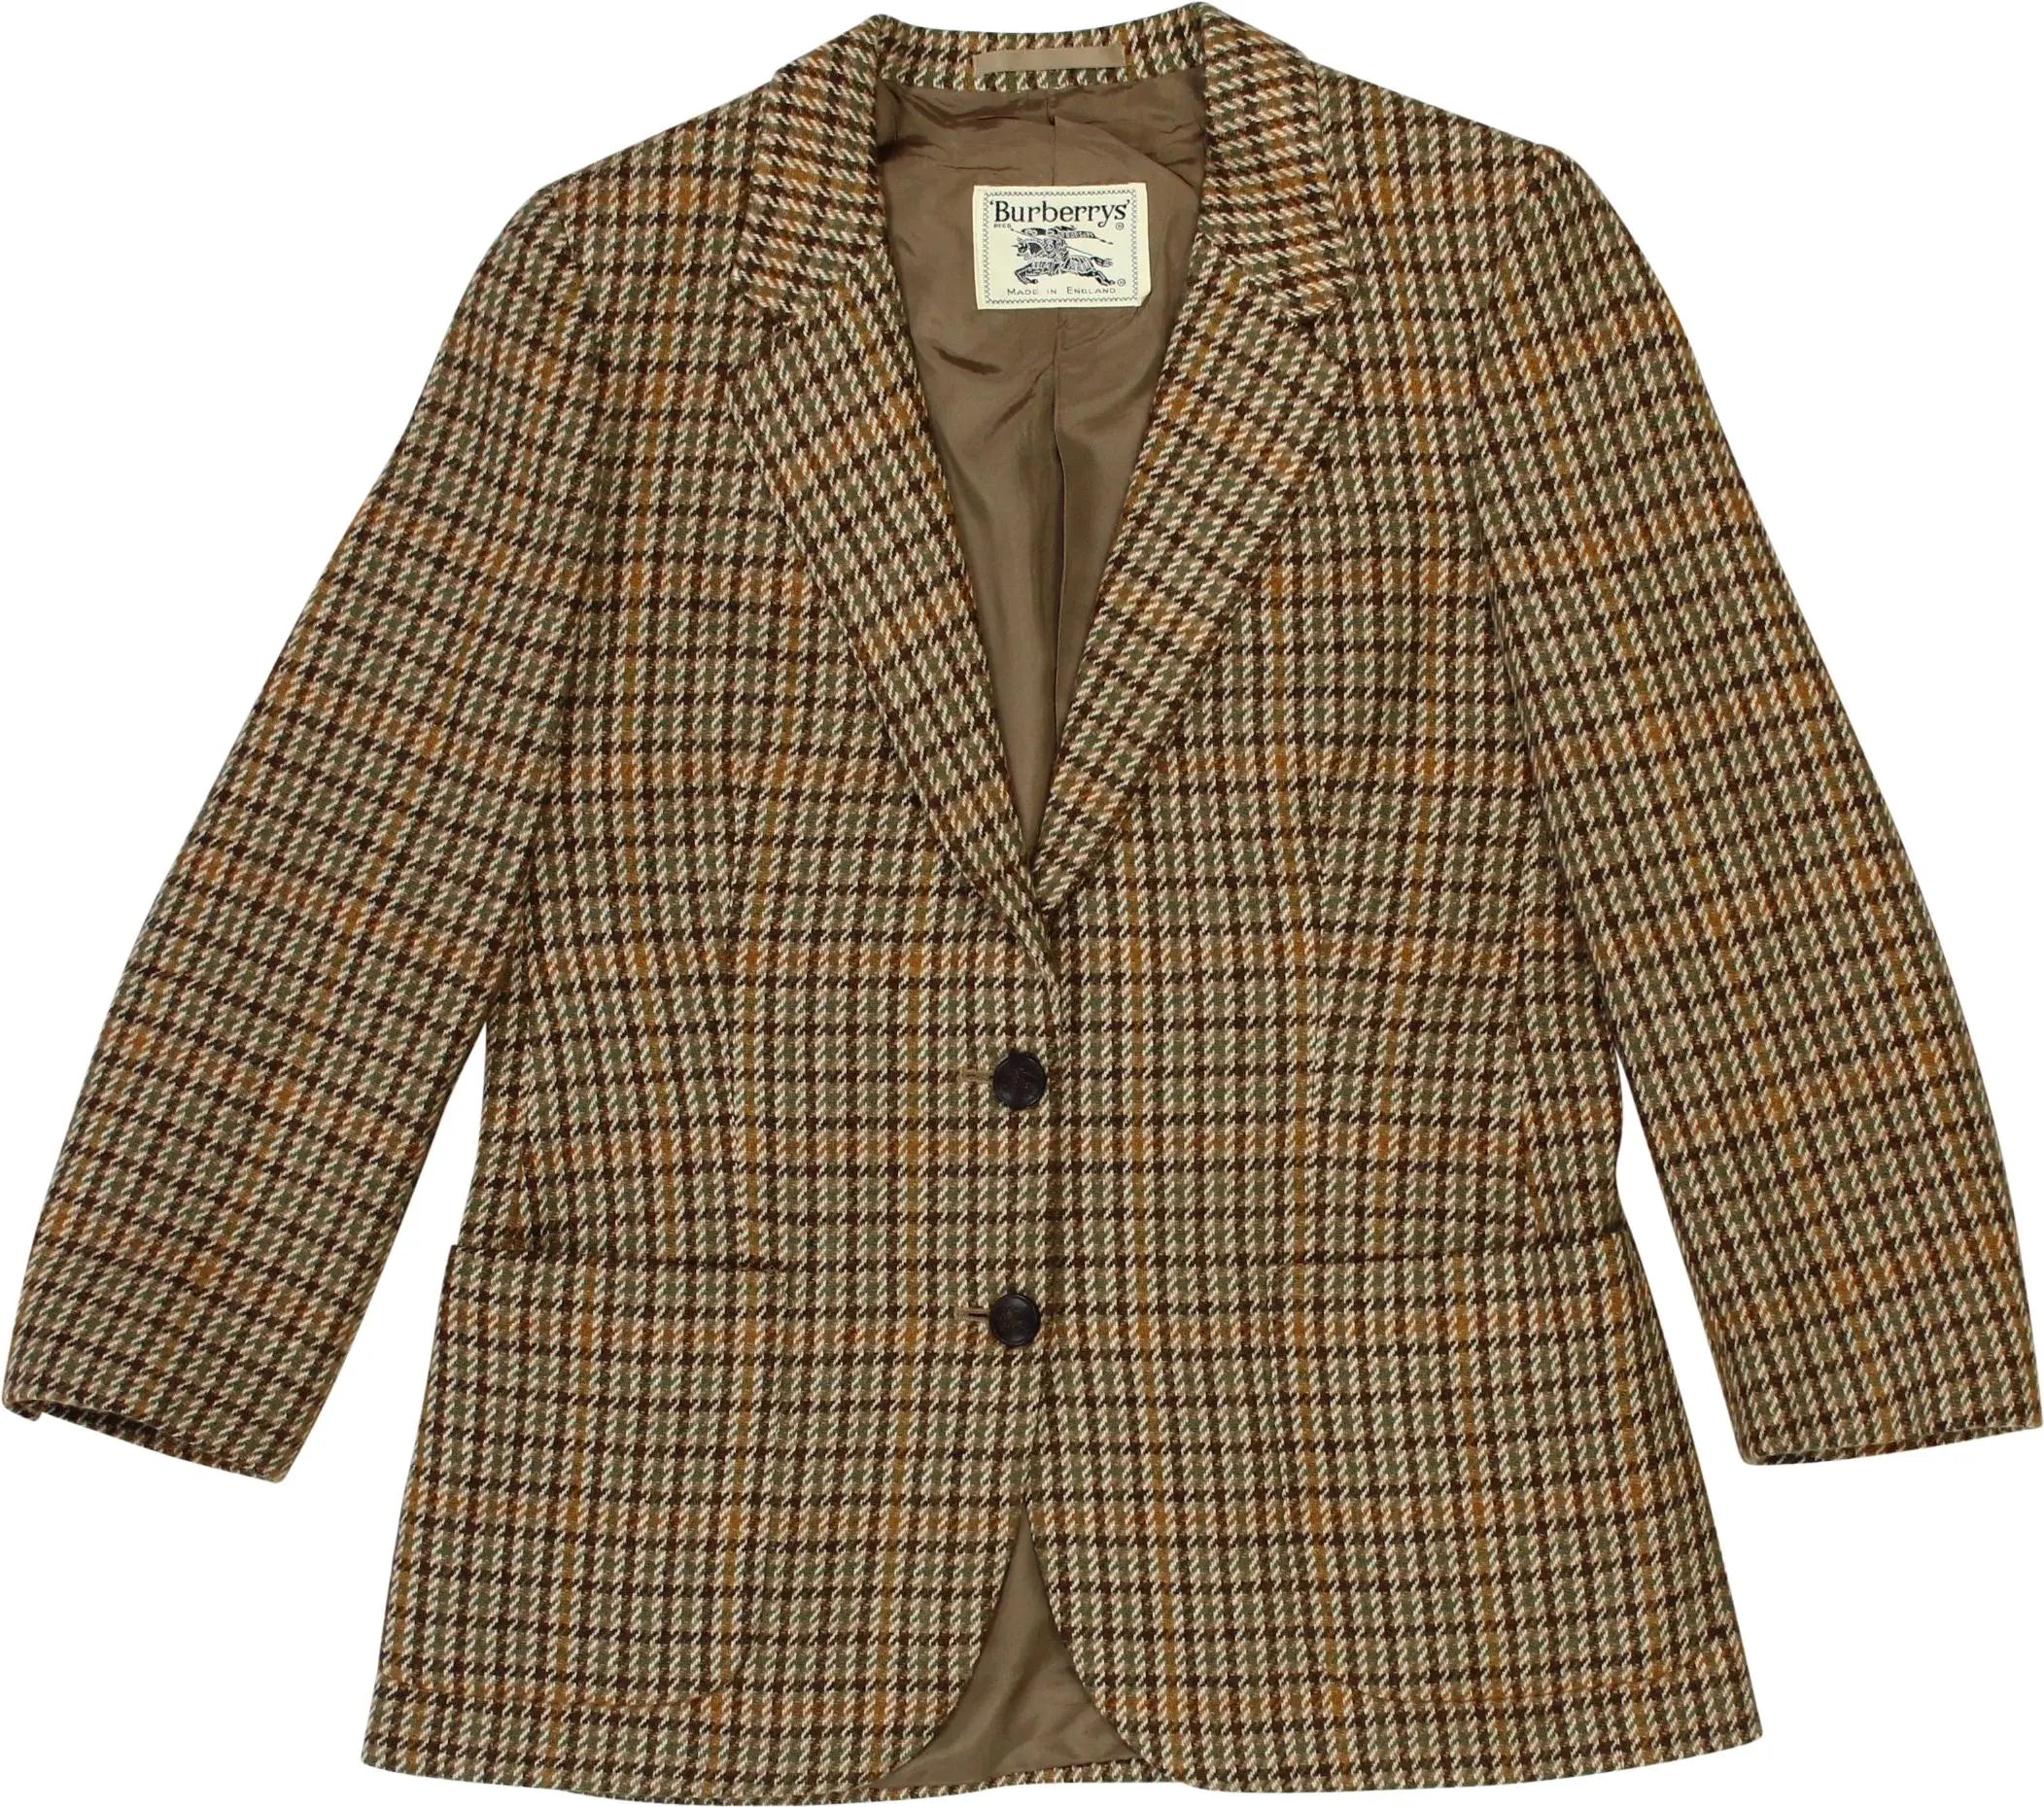 Burberry - Checked Wool Blazer by Burberry- ThriftTale.com - Vintage and second handclothing